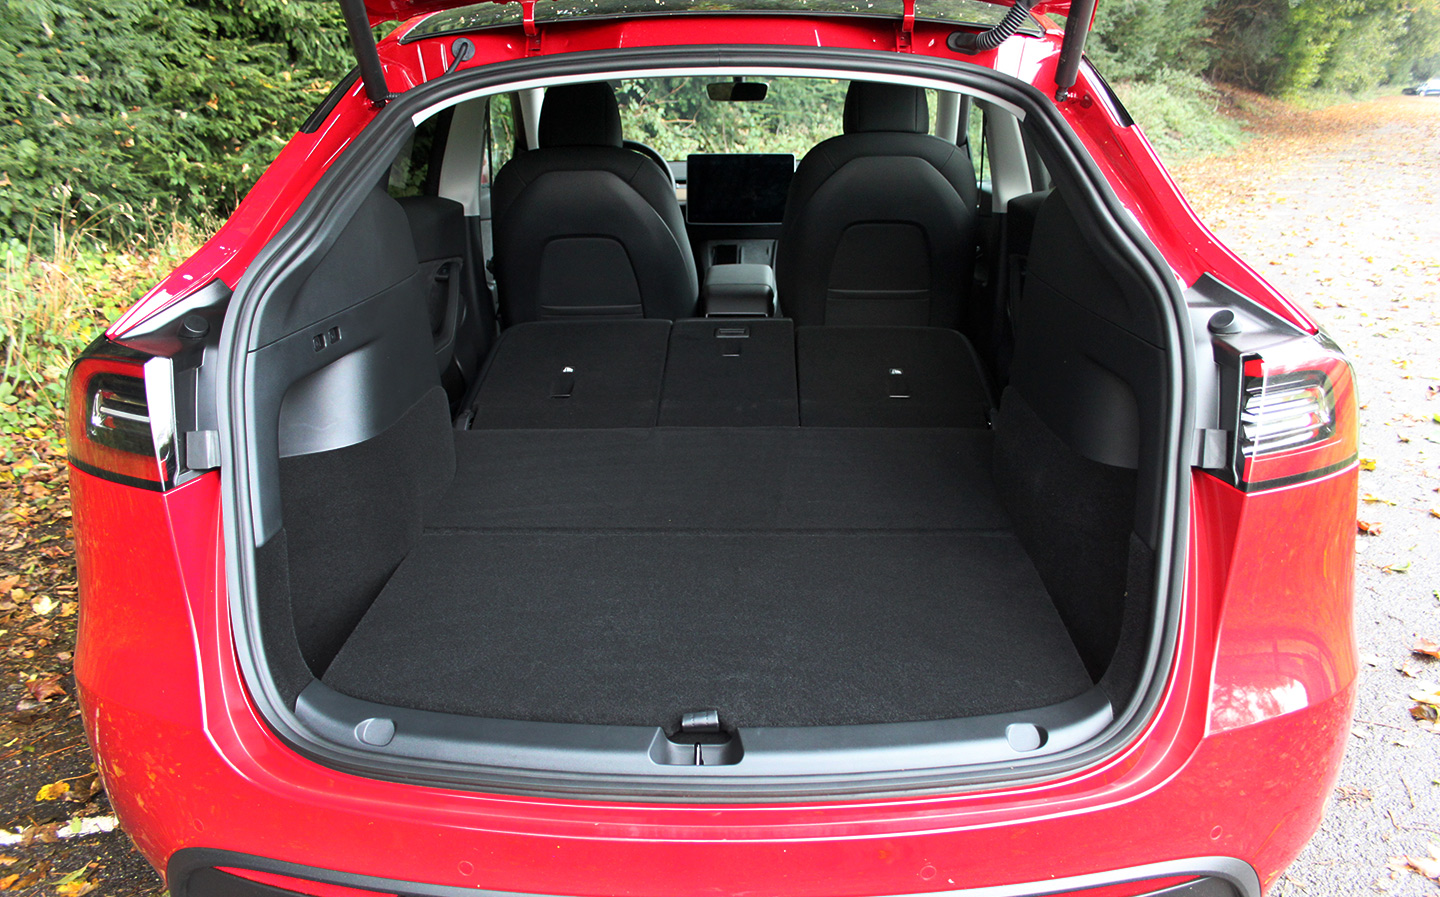 Boot storage and luggage space - Tesla Model Y 2022 review